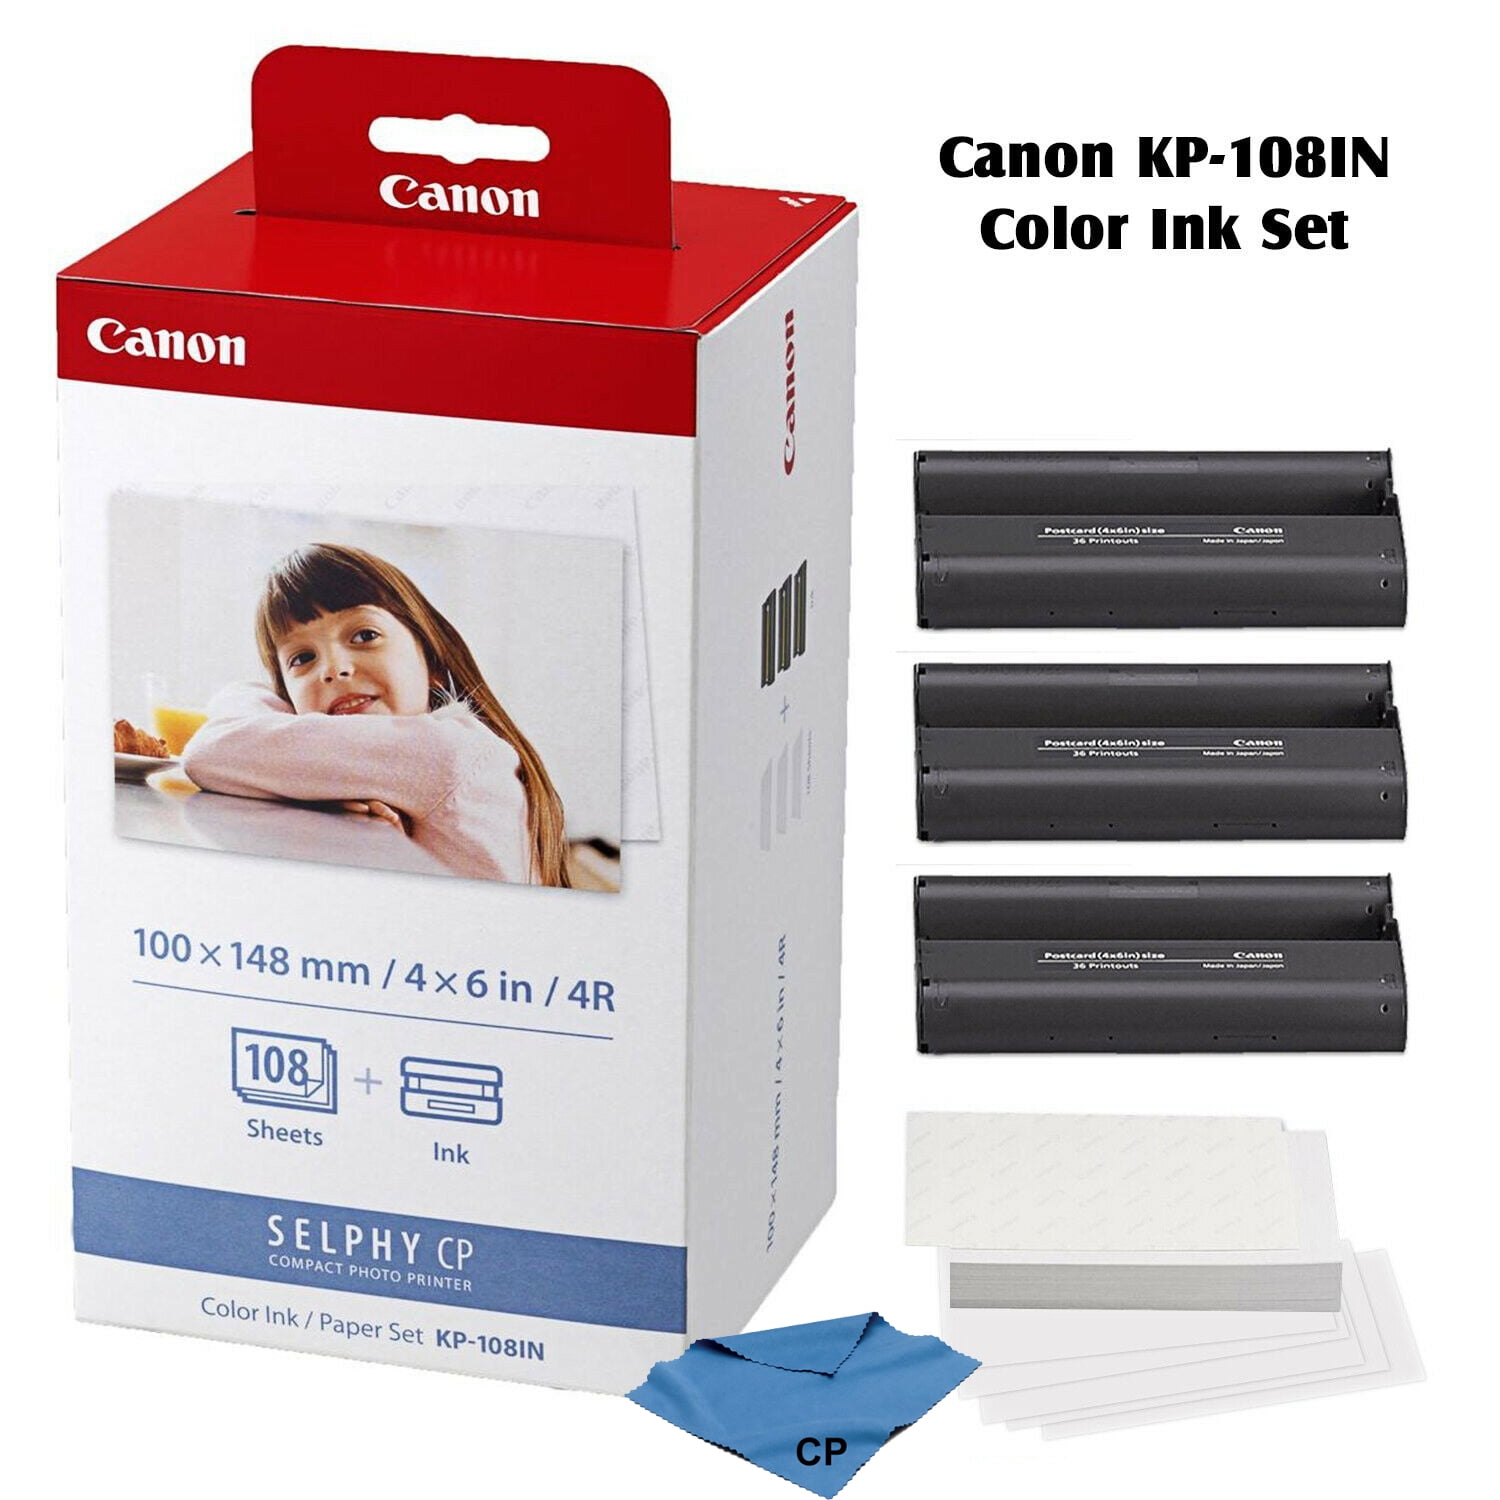 Compatible with Canon Selphy Printer AA Replacement Canon Selphy CP1200 CP910 CP1300 Ink and Paper 108 Sheets Printer Paper Photo Paper KP-108IN 3115B001 with 3 Ink cartridges 4 x 6 inch